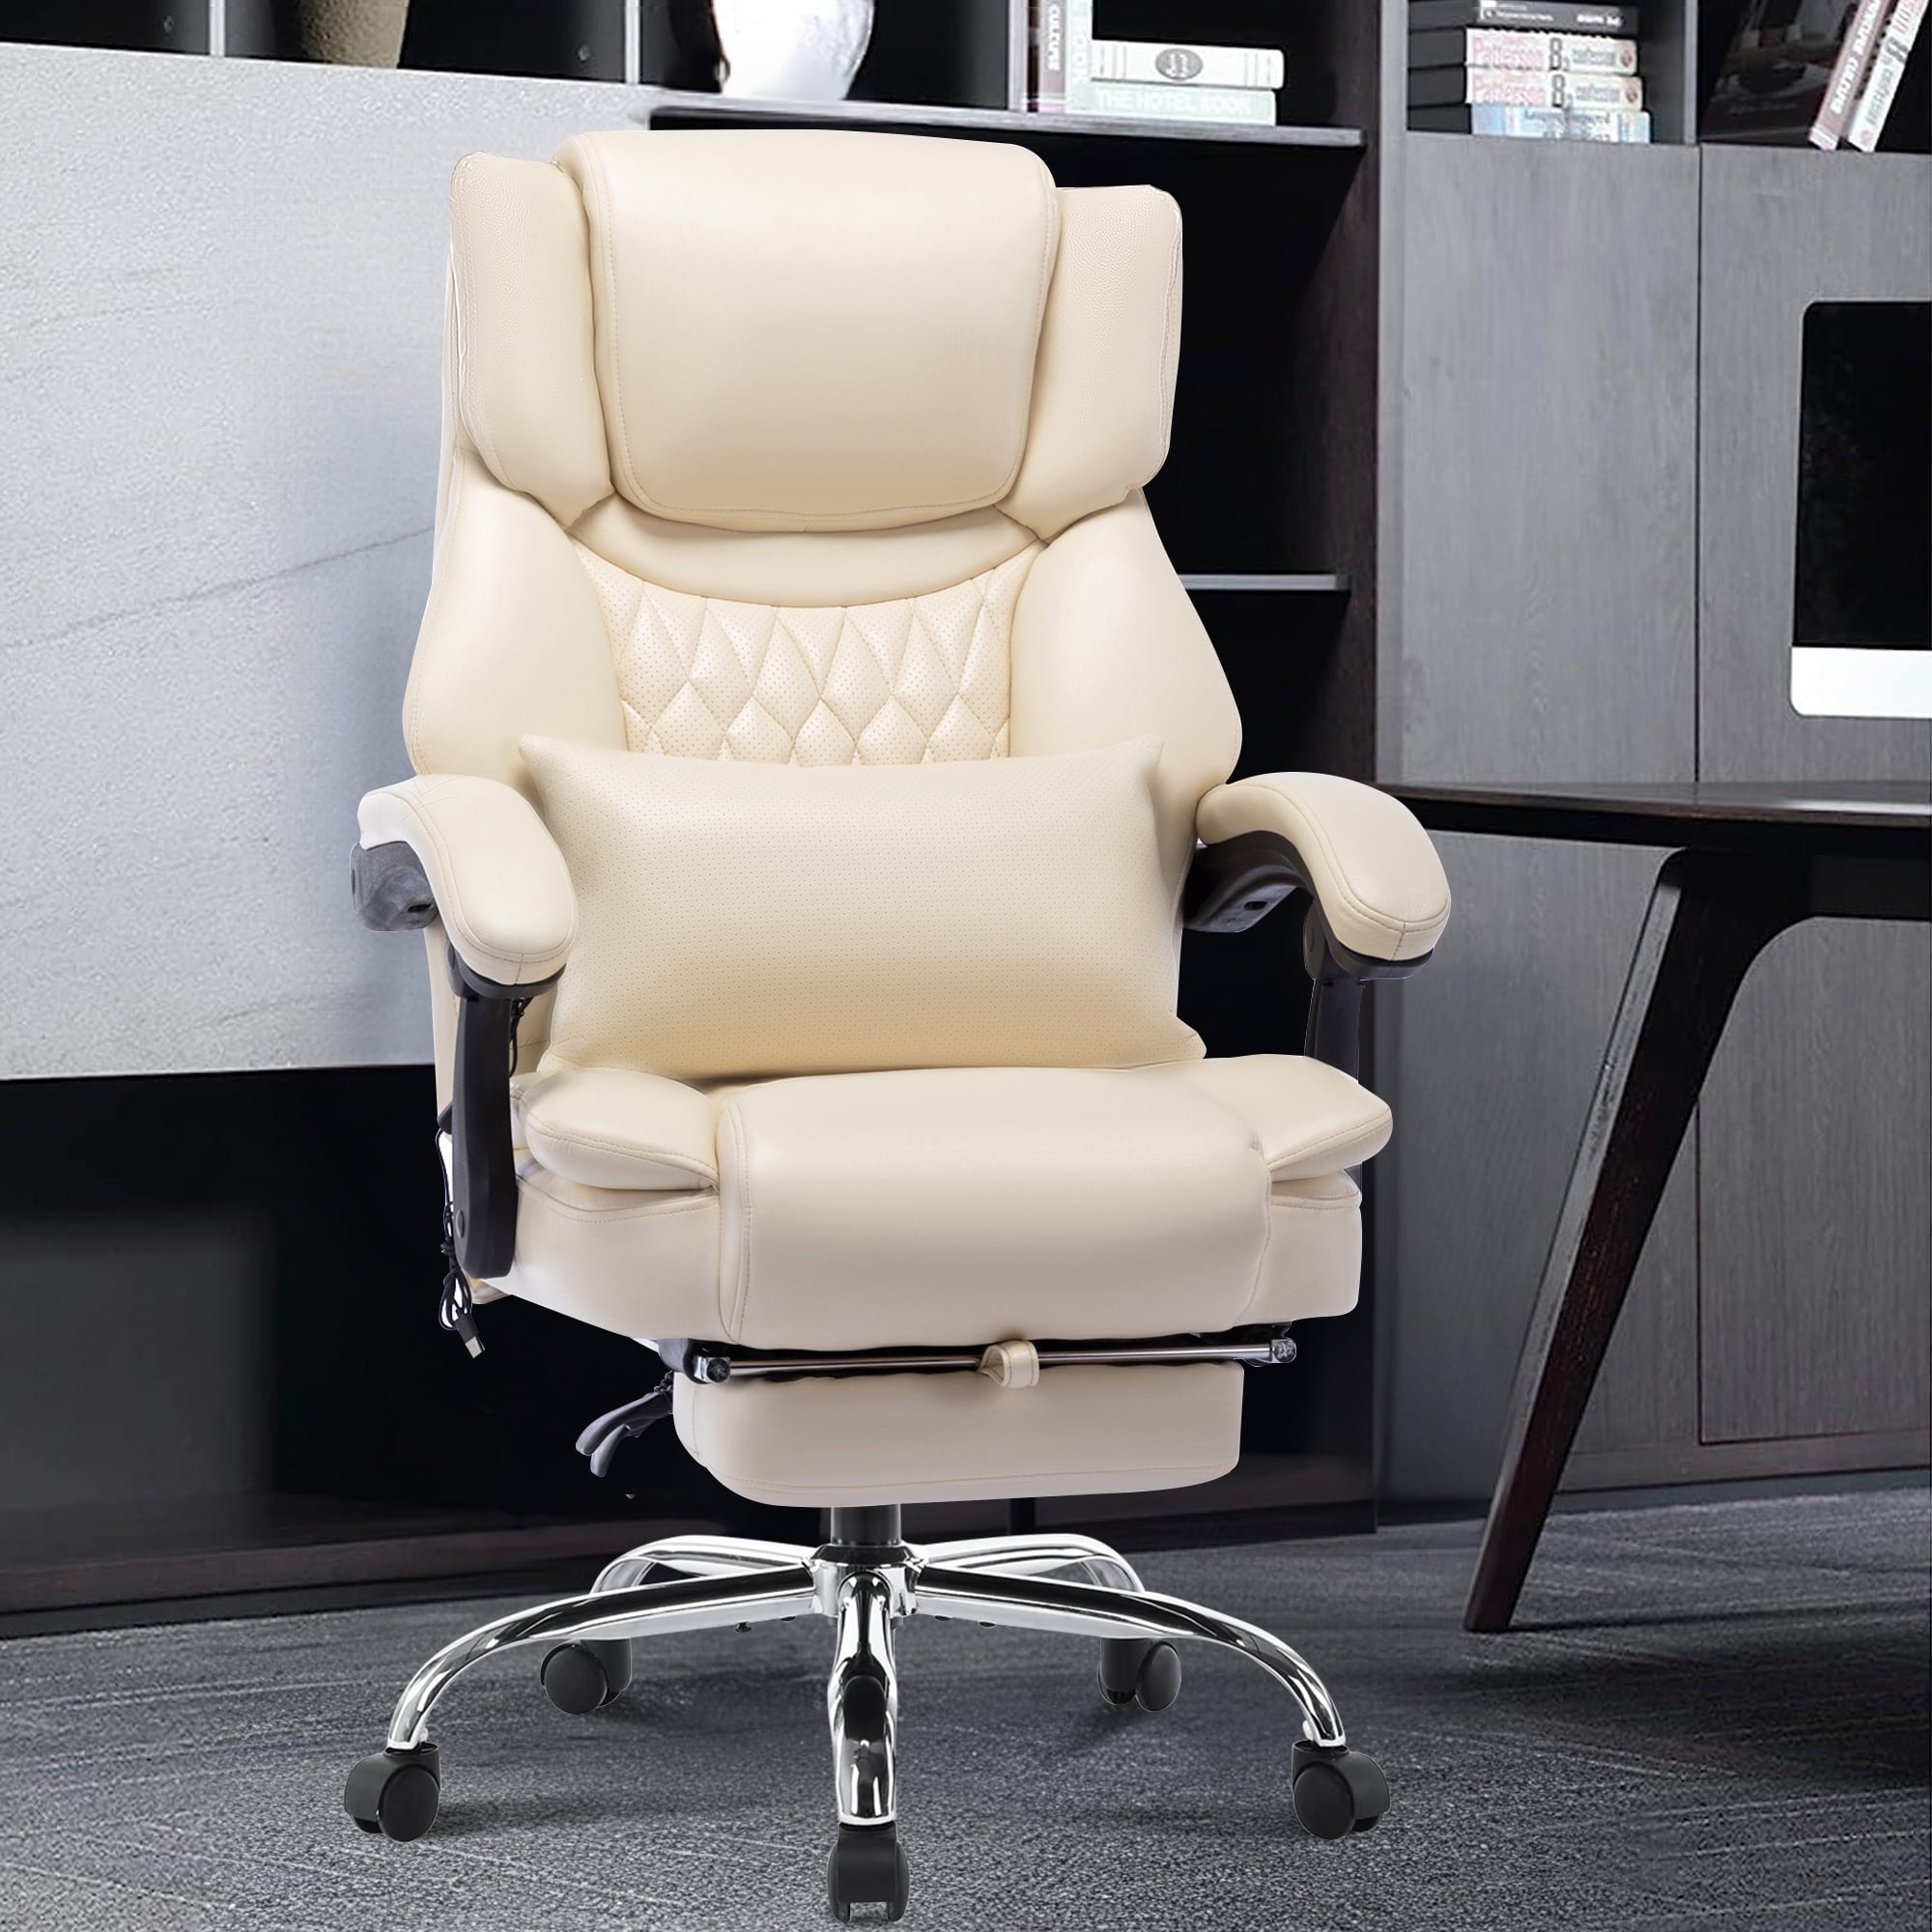 Upgraded High Back Ergonomic Office Chair with Footrest &Tiltable